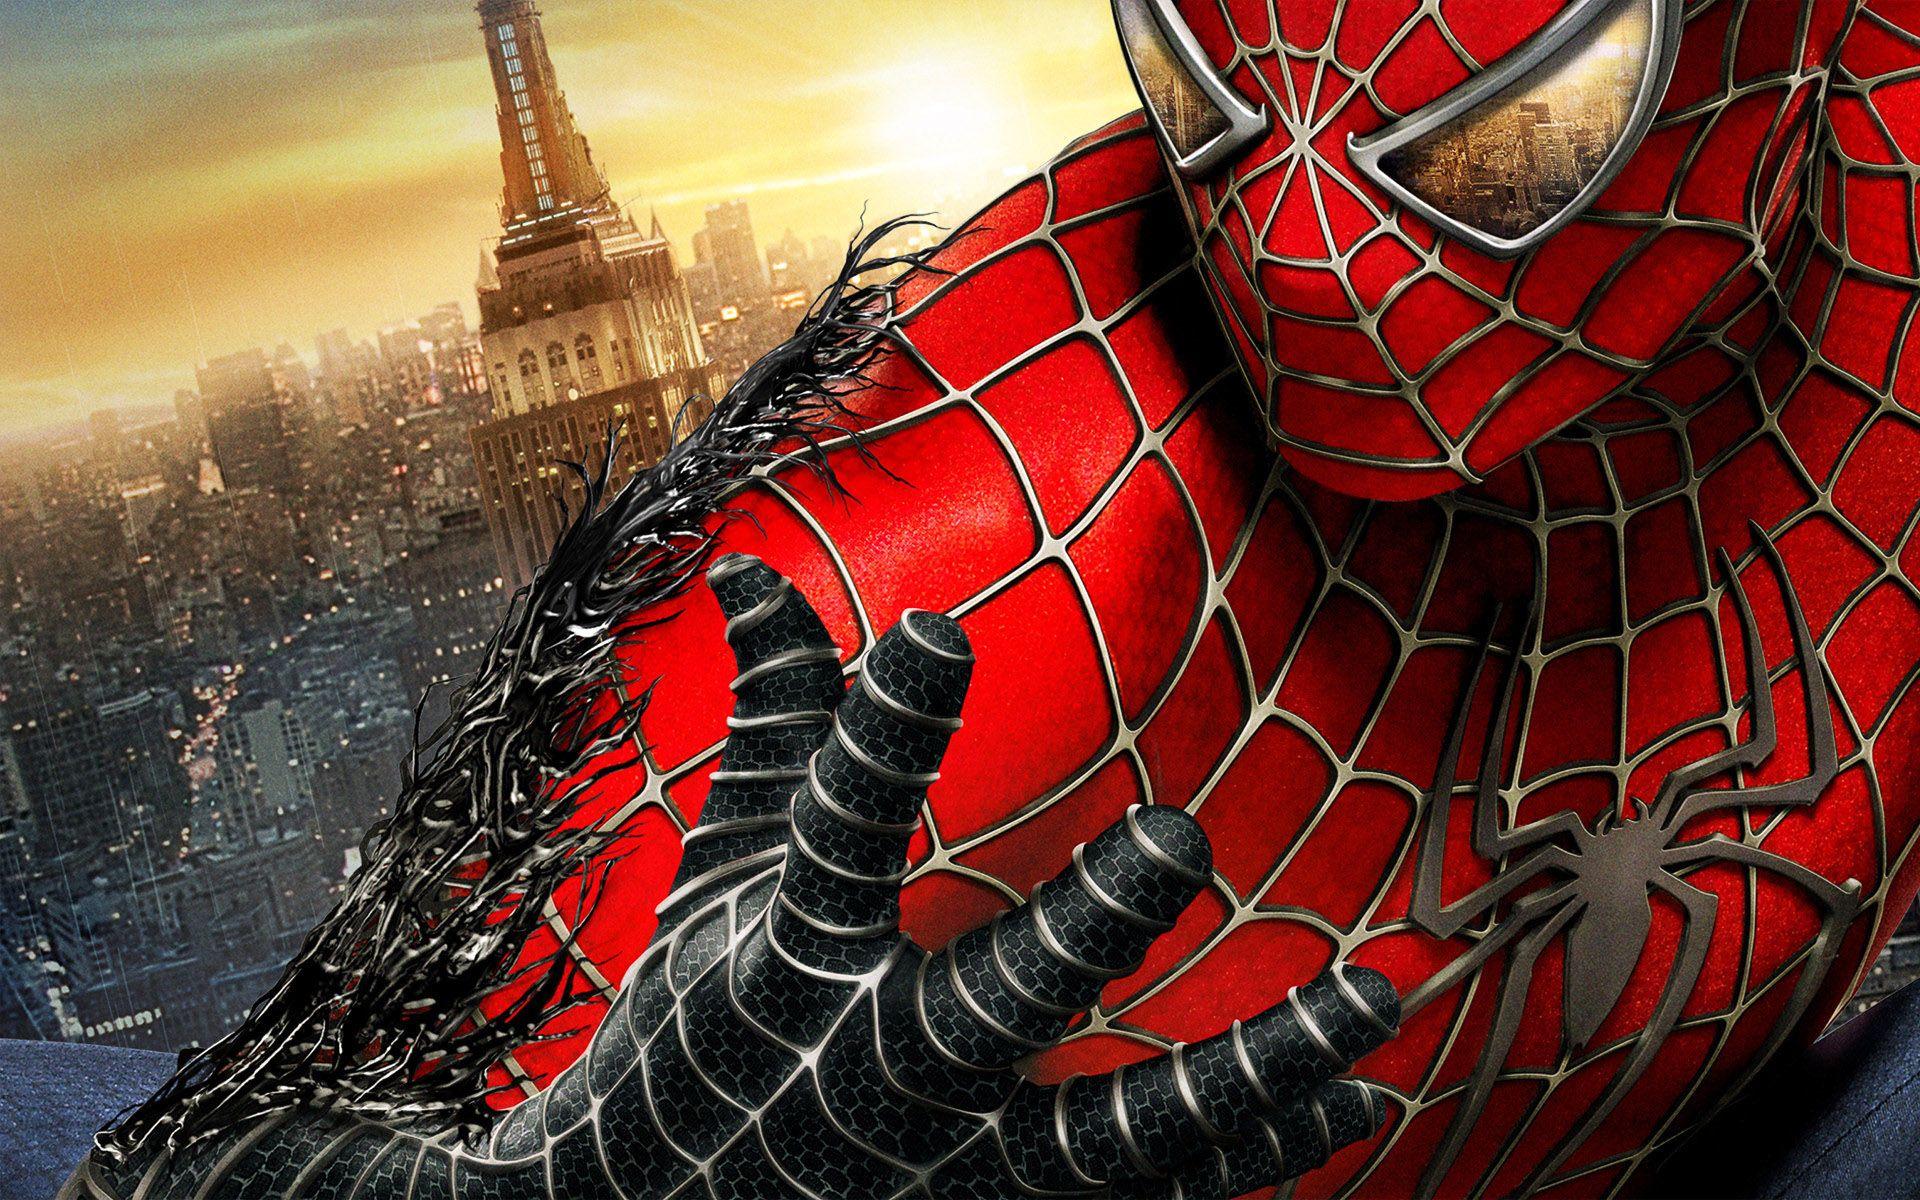 Spiderman Wallpaper for PC. Full HD Picture